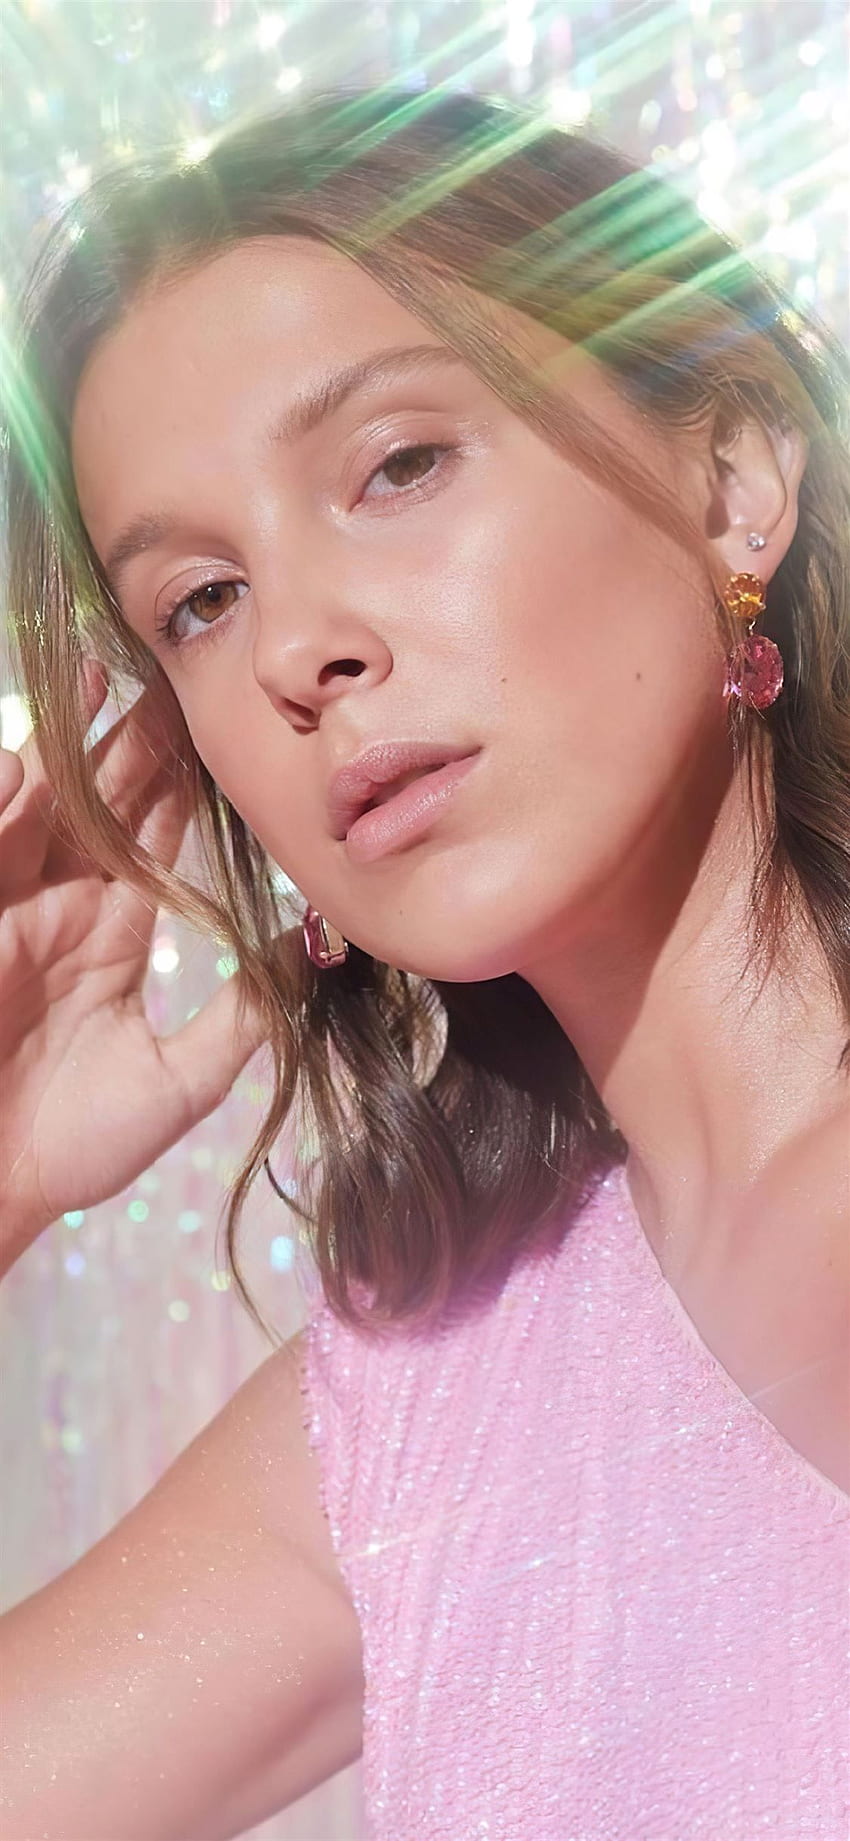 millie bobby brown florence by mills highlight you iPhone HD phone wallpaper